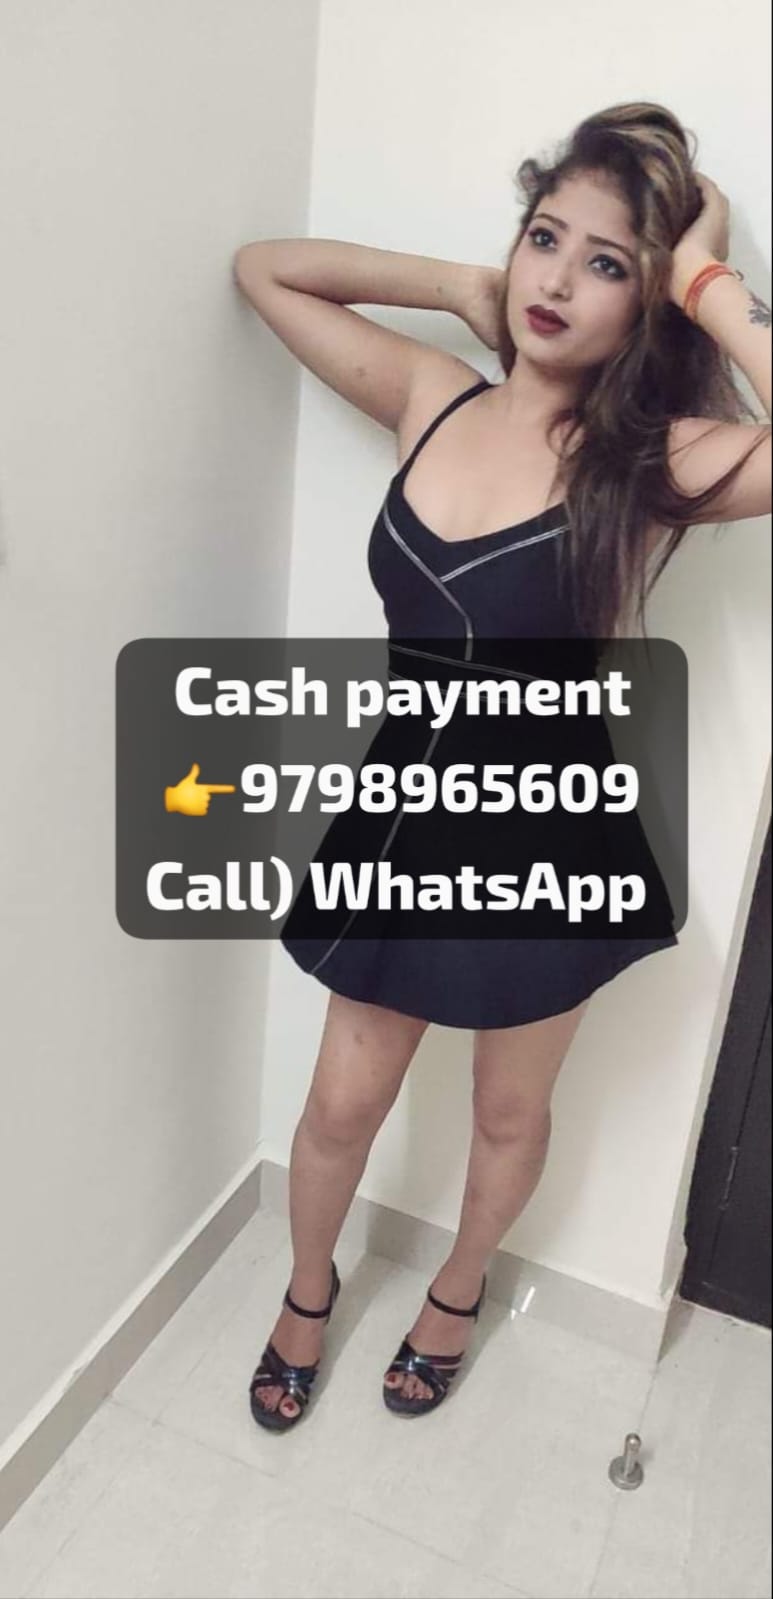 Viman Nagar in VIP model college girl available anytime 